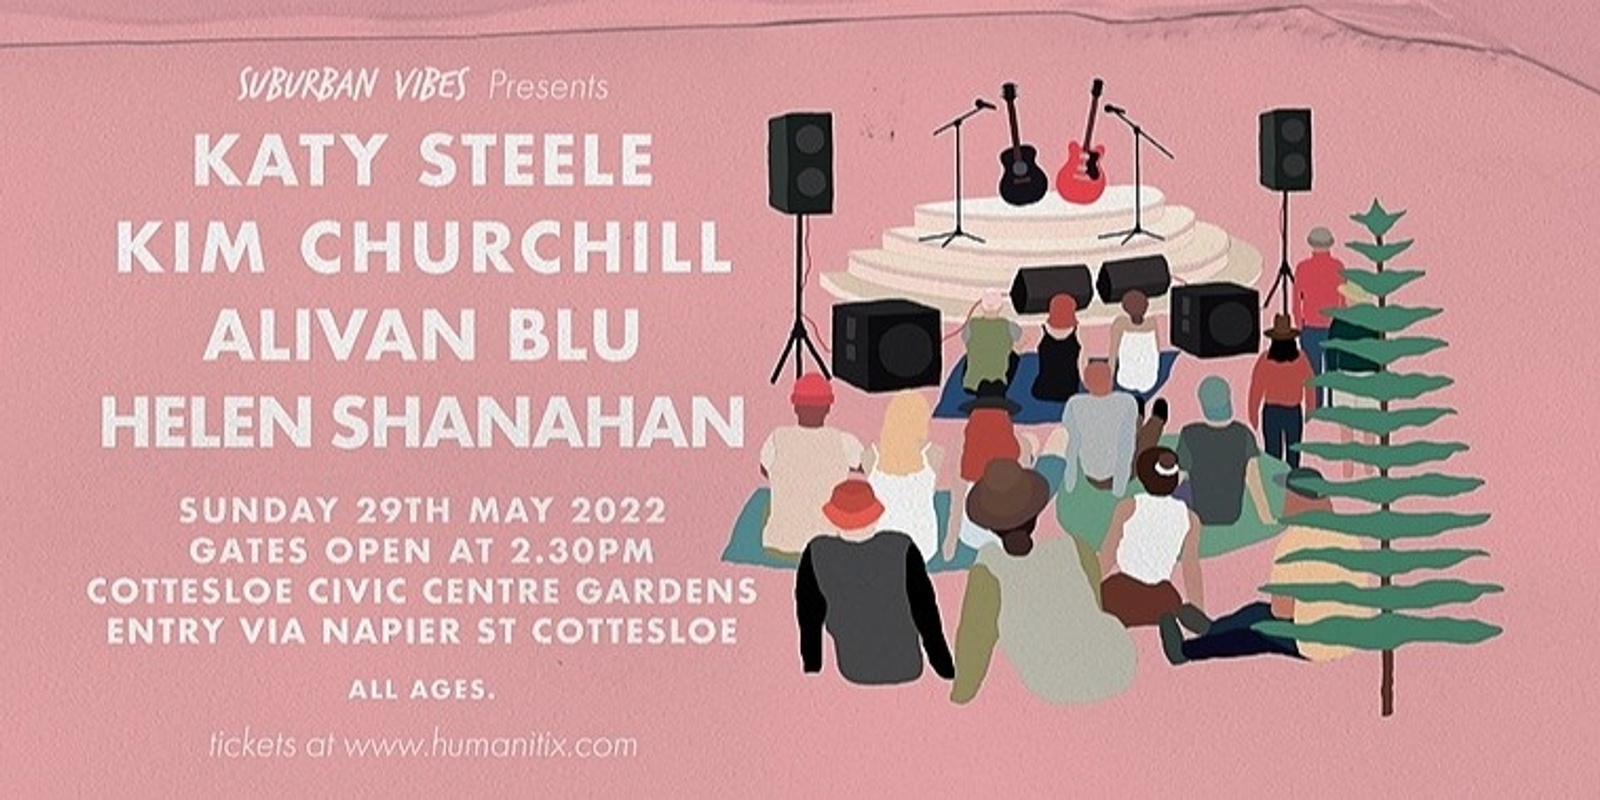 Banner image for Suburban Vibes Presents Katy Steele & Kim Churchill w/Guests